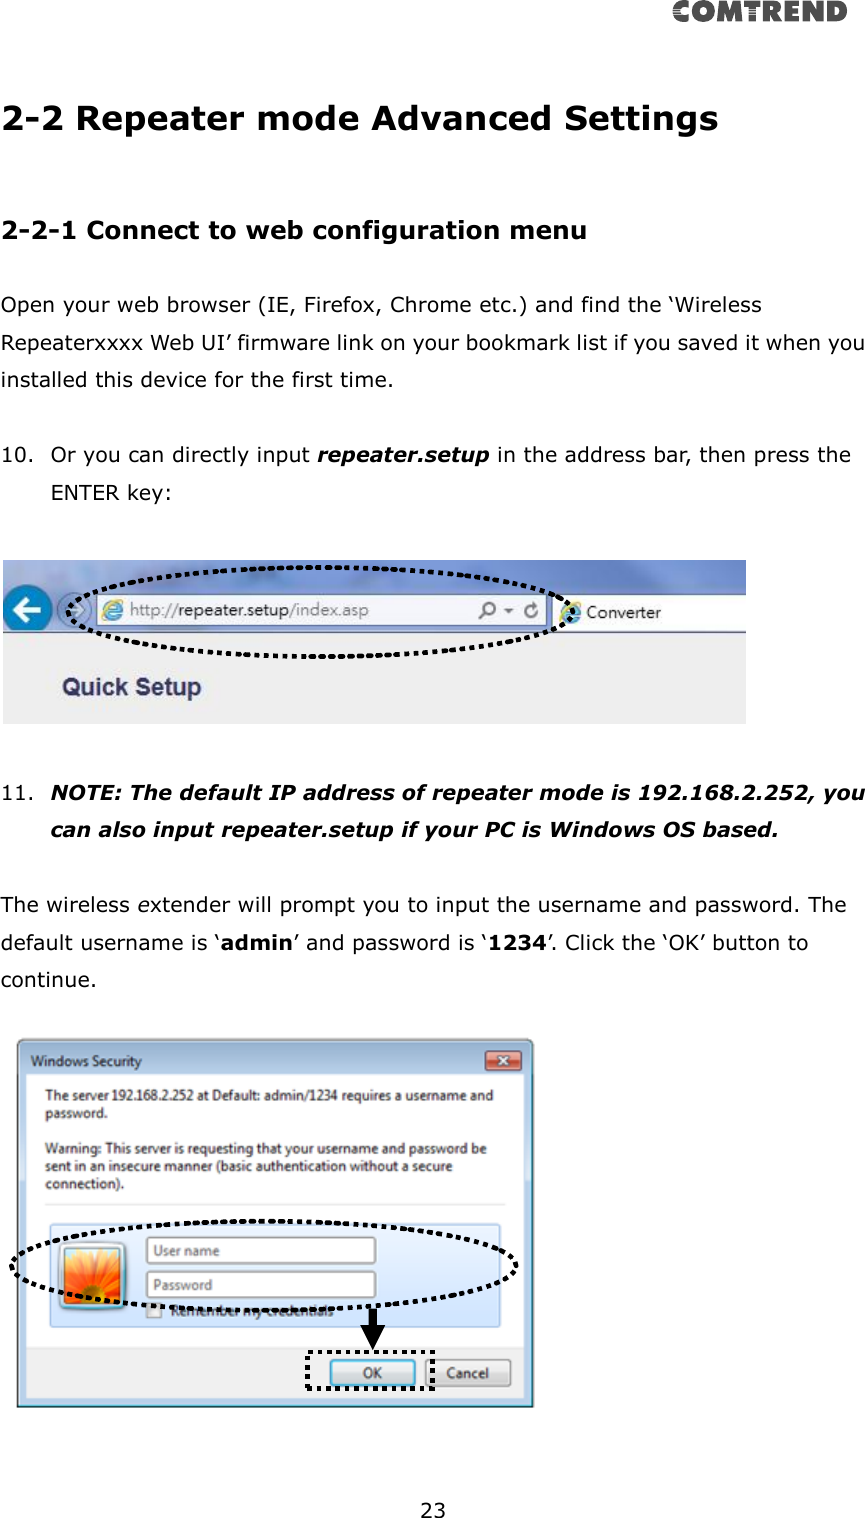       23  2-2 Repeater mode Advanced Settings  2-2-1 Connect to web configuration menu  Open your web browser (IE, Firefox, Chrome etc.) and find the ‘Wireless Repeaterxxxx Web UI’ firmware link on your bookmark list if you saved it when you installed this device for the first time.    10. Or you can directly input repeater.setup in the address bar, then press the ENTER key:    11. NOTE: The default IP address of repeater mode is 192.168.2.252, you can also input repeater.setup if your PC is Windows OS based.  The wireless extender will prompt you to input the username and password. The default username is ‘admin’ and password is ‘1234’. Click the ‘OK’ button to continue.        